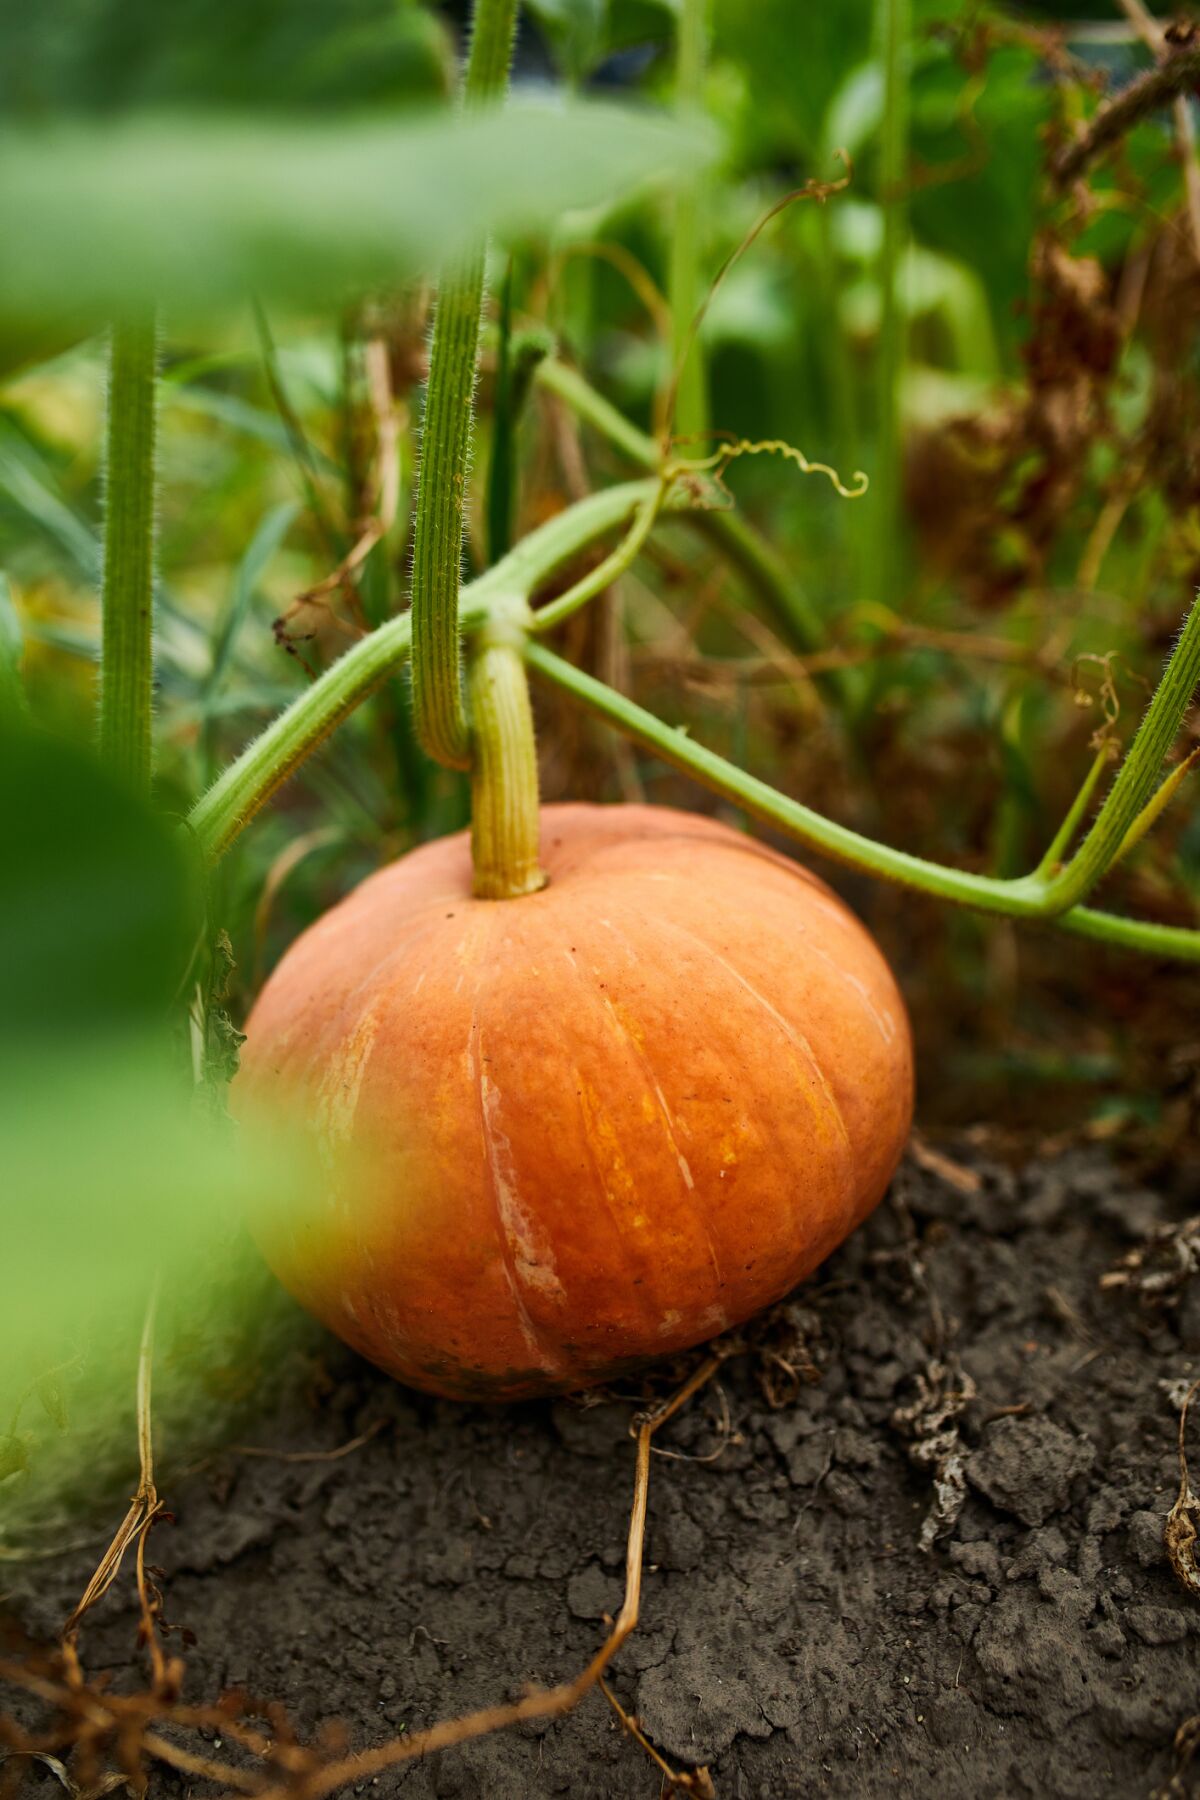 Pumpkins may be ready for harvest when stems turn brown and start to pull away from the fruit.